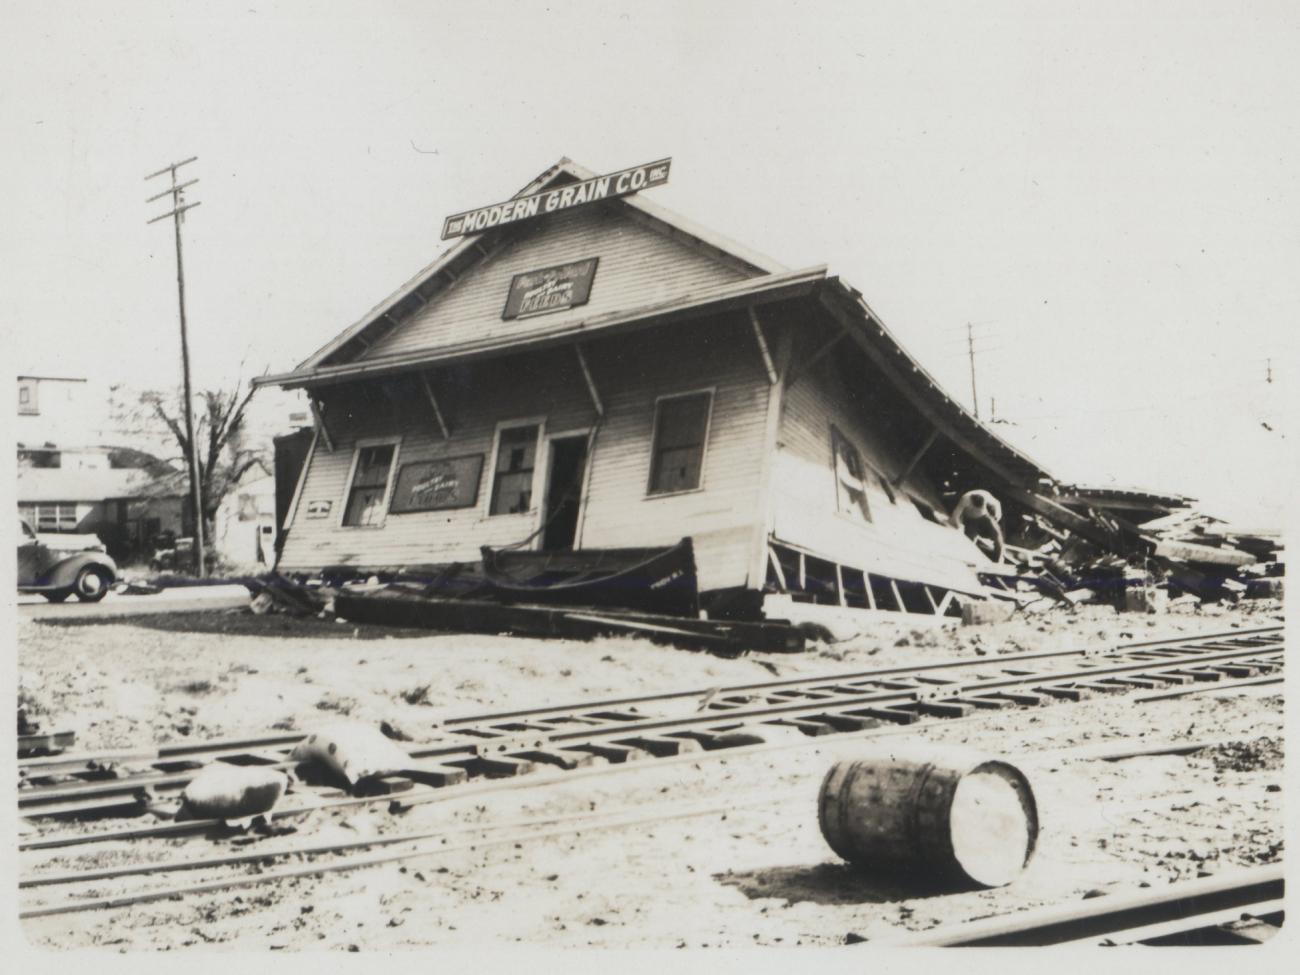 The Modern Grain Company building at India Point in the upper reaches ofNarragansett Bay was destroyed by the storm surge